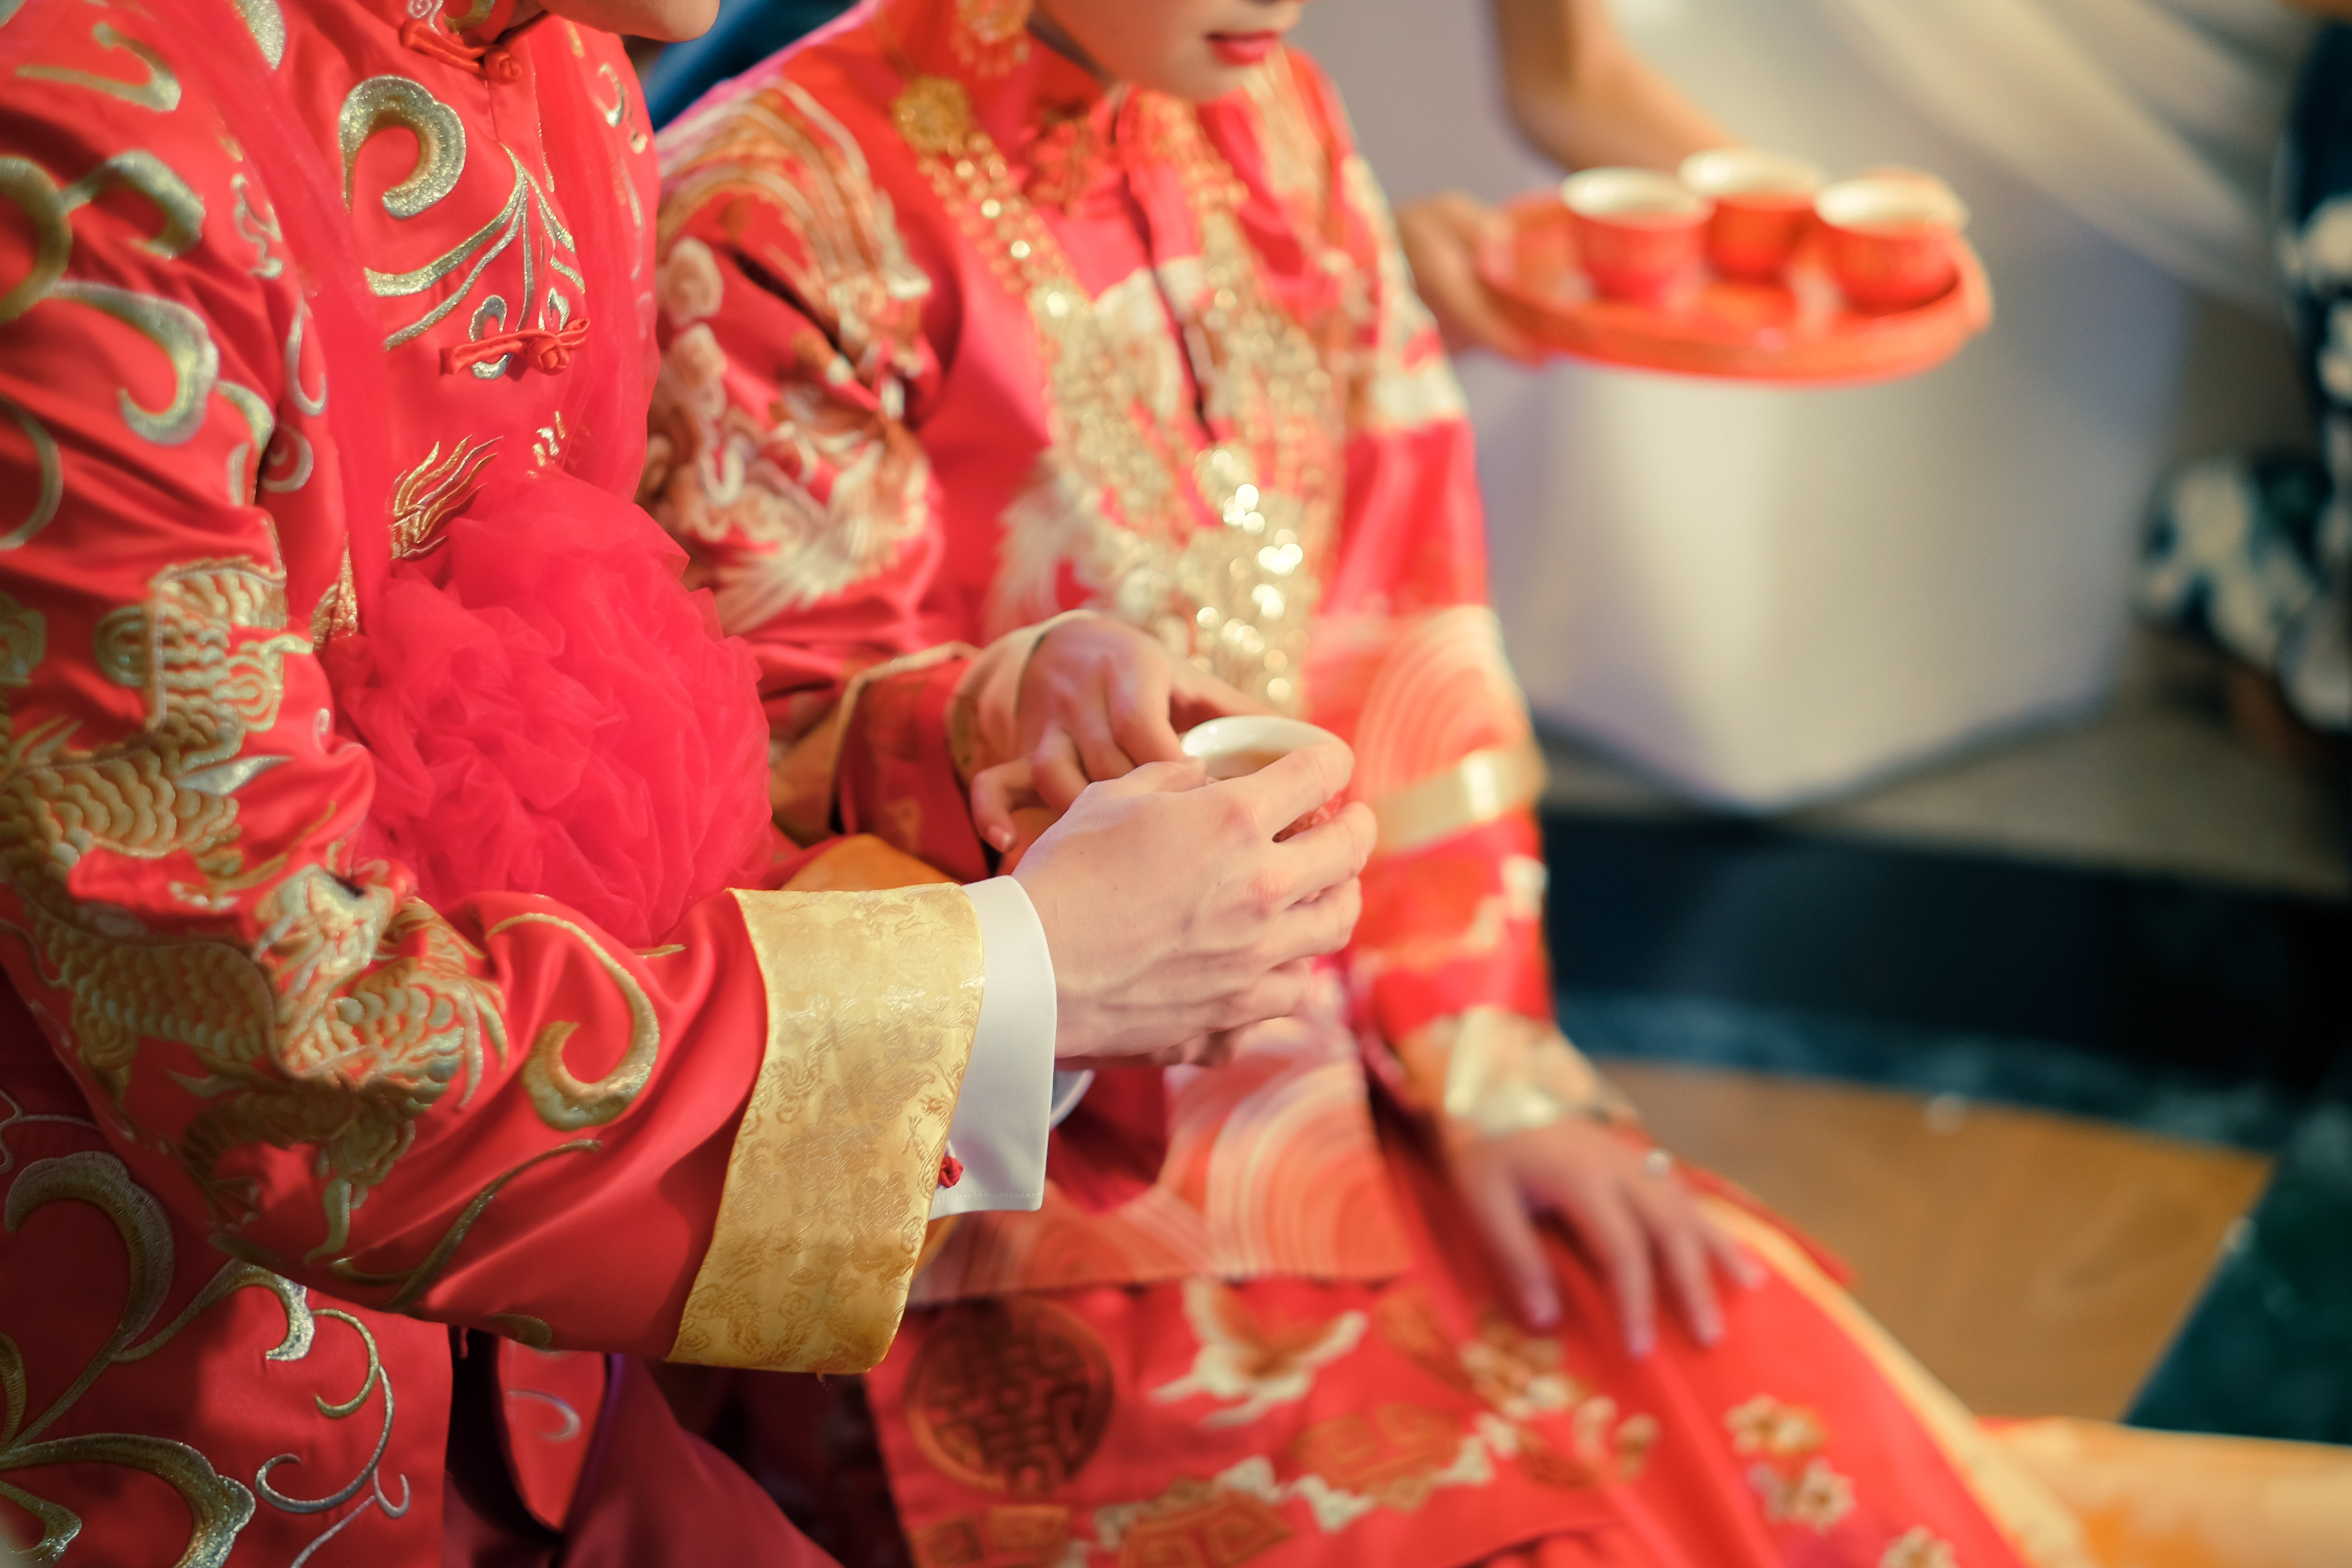 There are concerns in China that the upcoming “Year of the Widow” could deter people from getting married and starting a family. Photo: Shutterstock